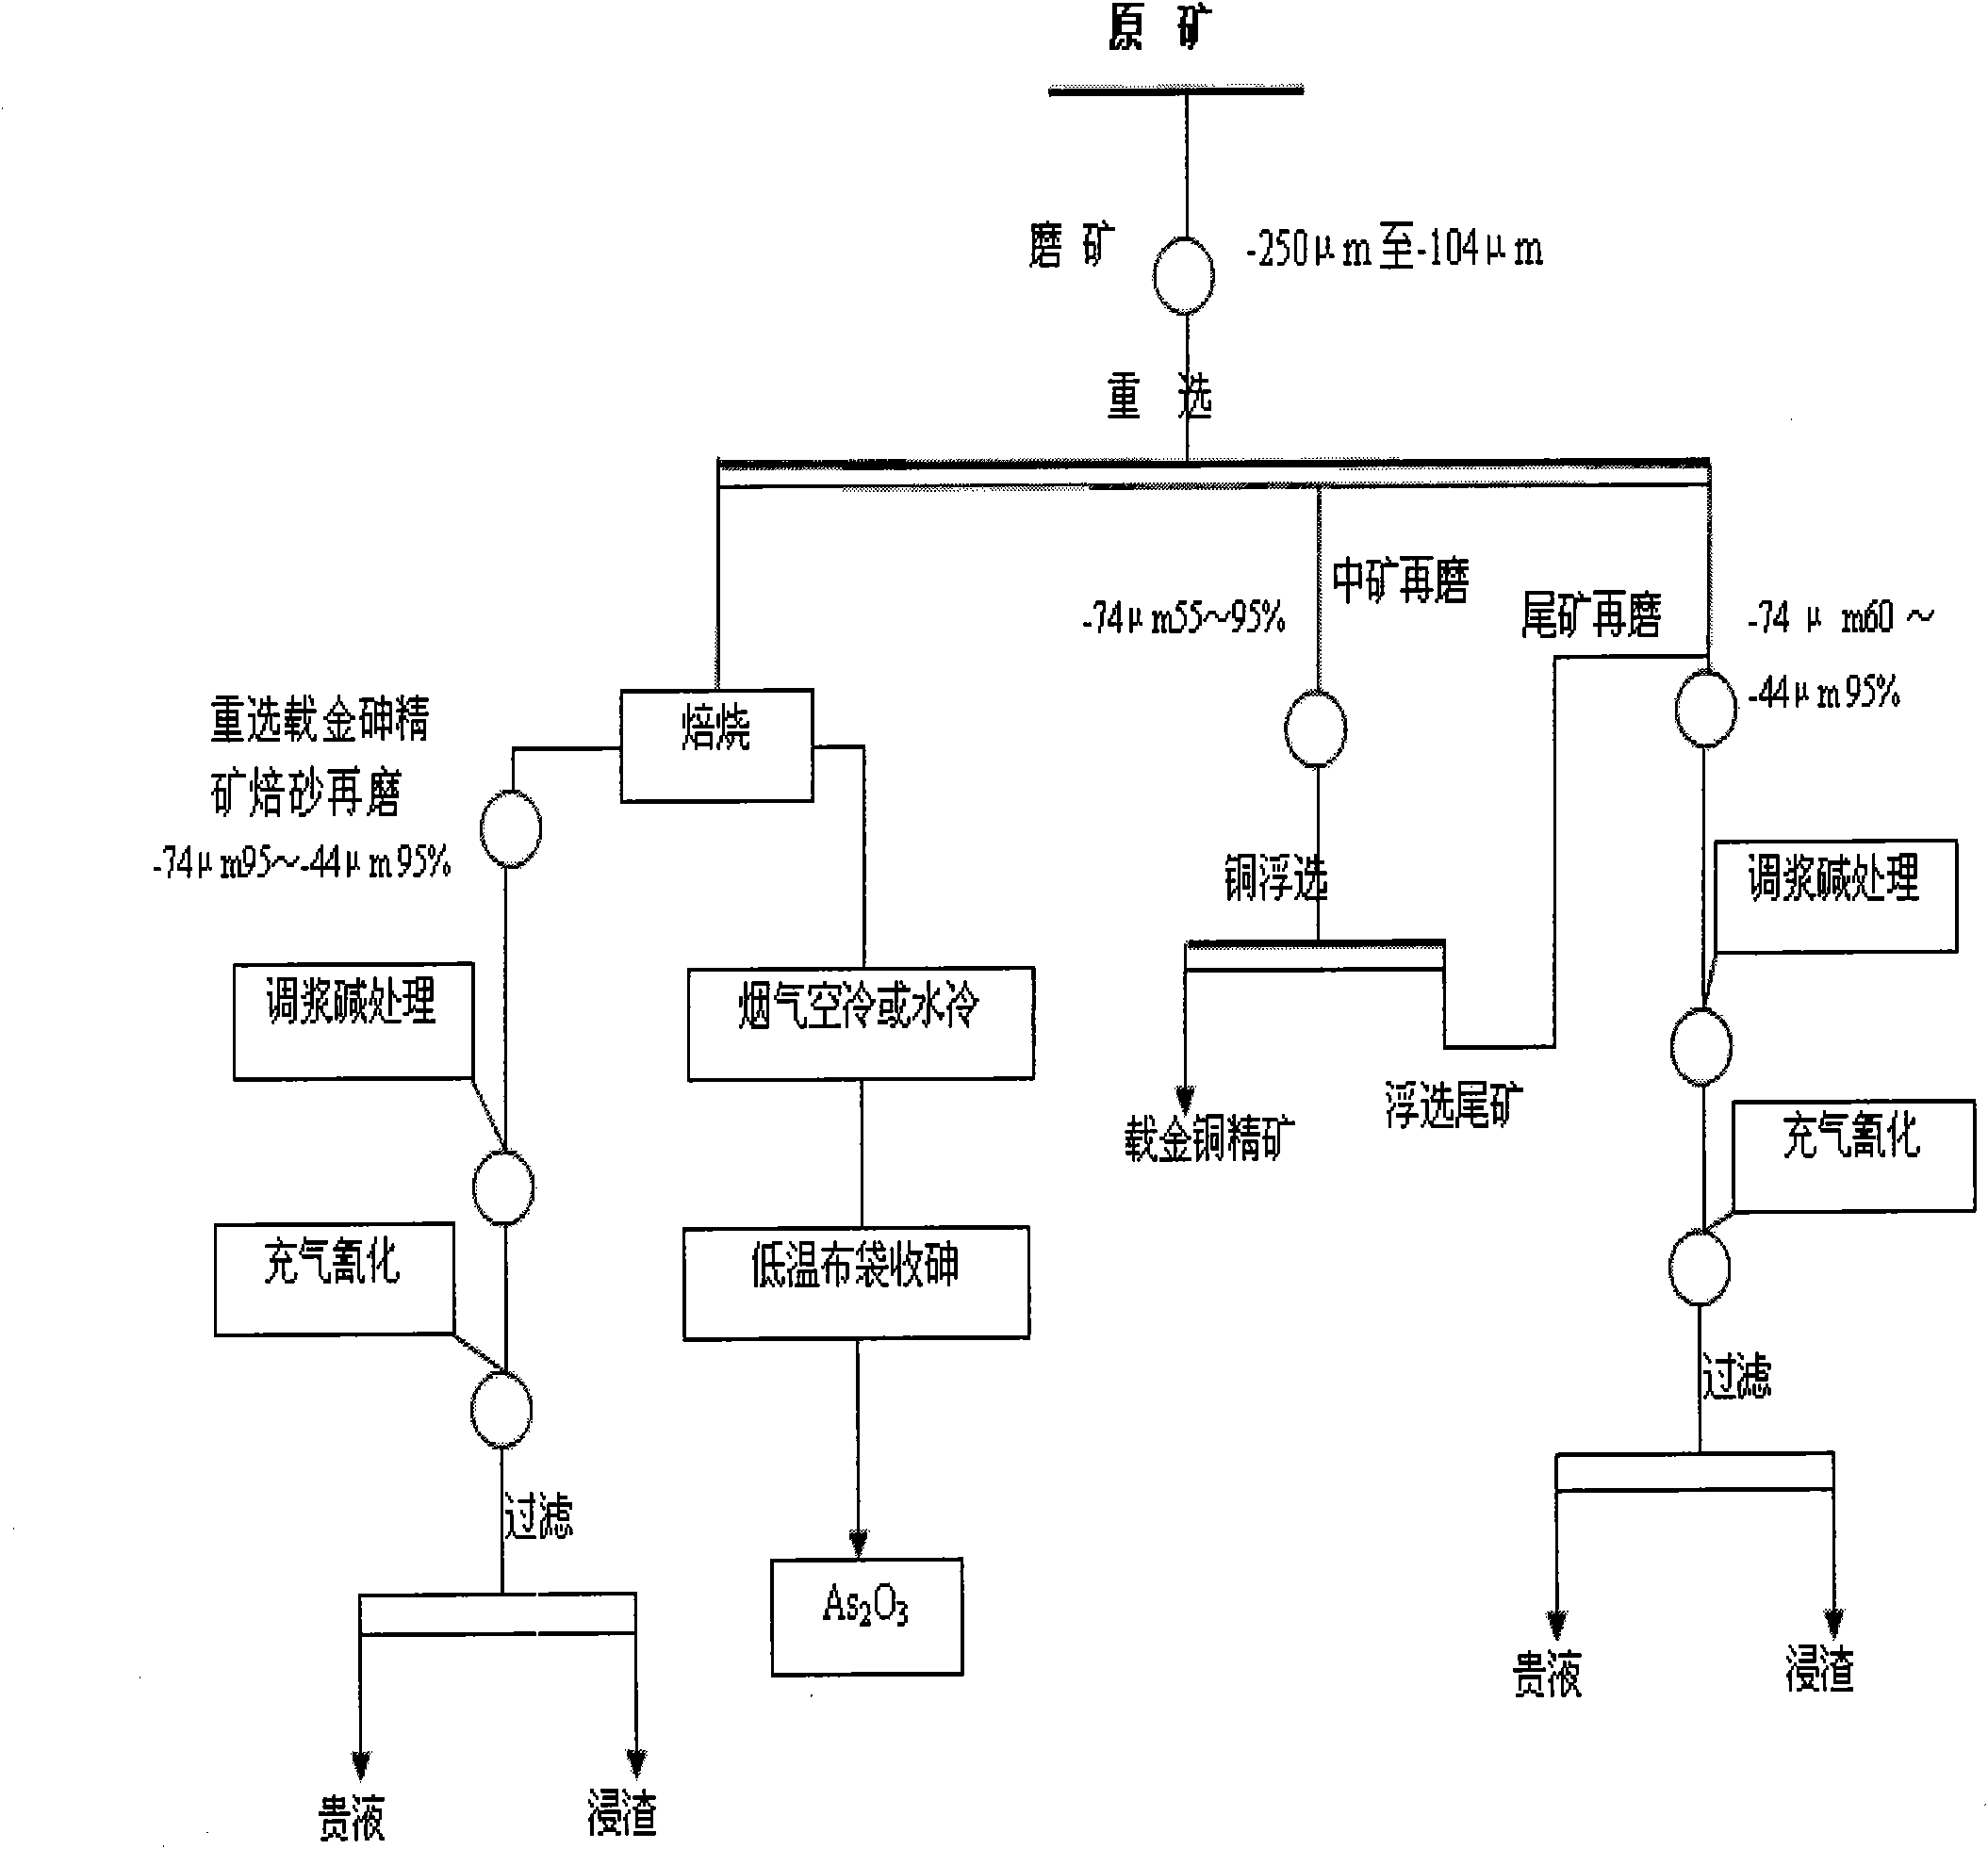 Process for processing complex gold ore containing copper and arsenic